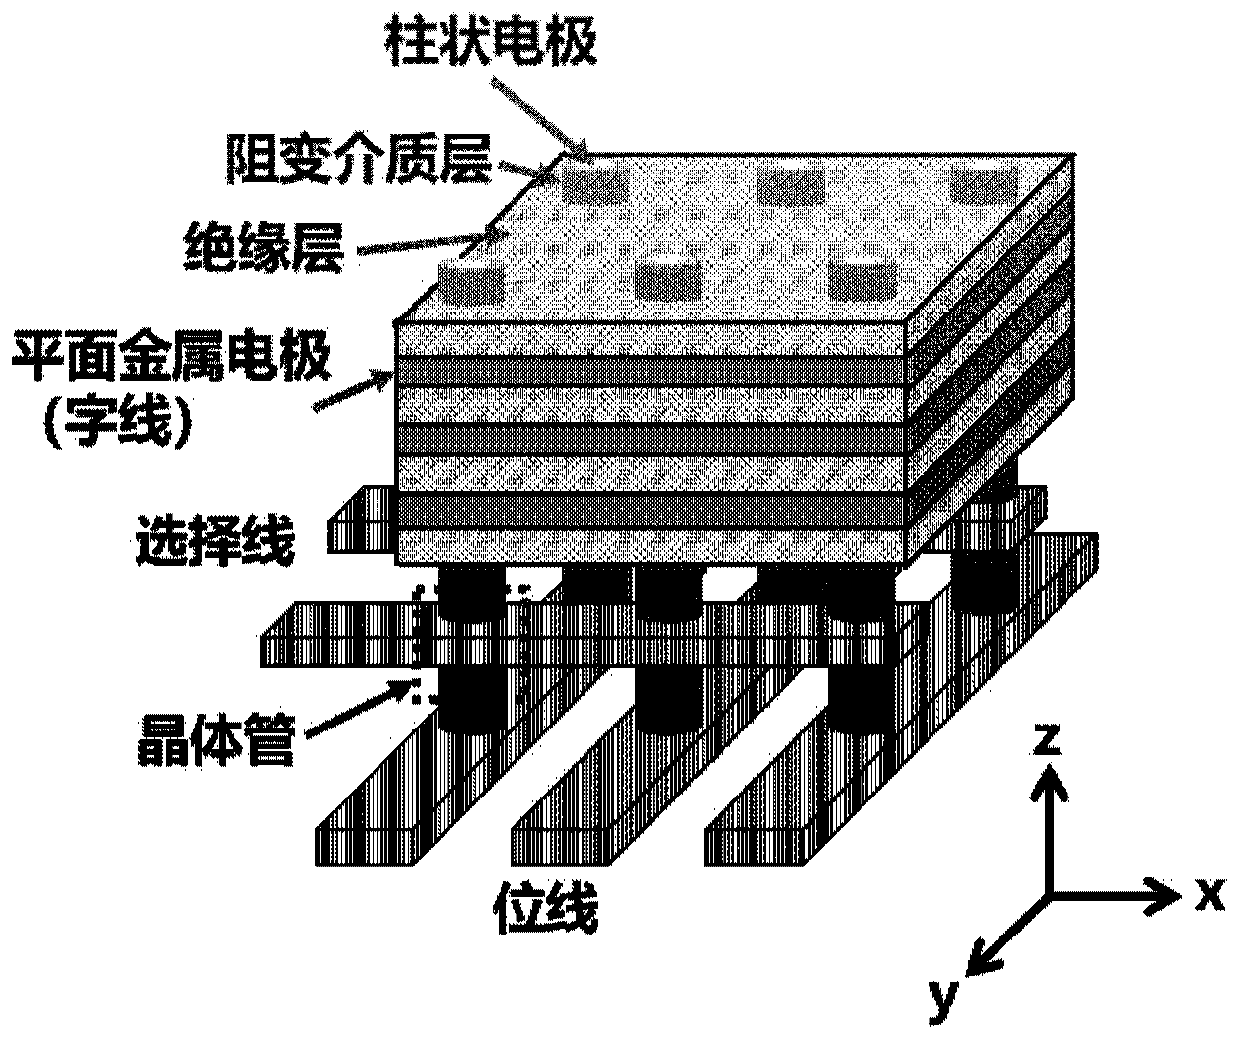 Three-dimensional vertical resistive random access memory array and operation method and device thereof, equipment and medium